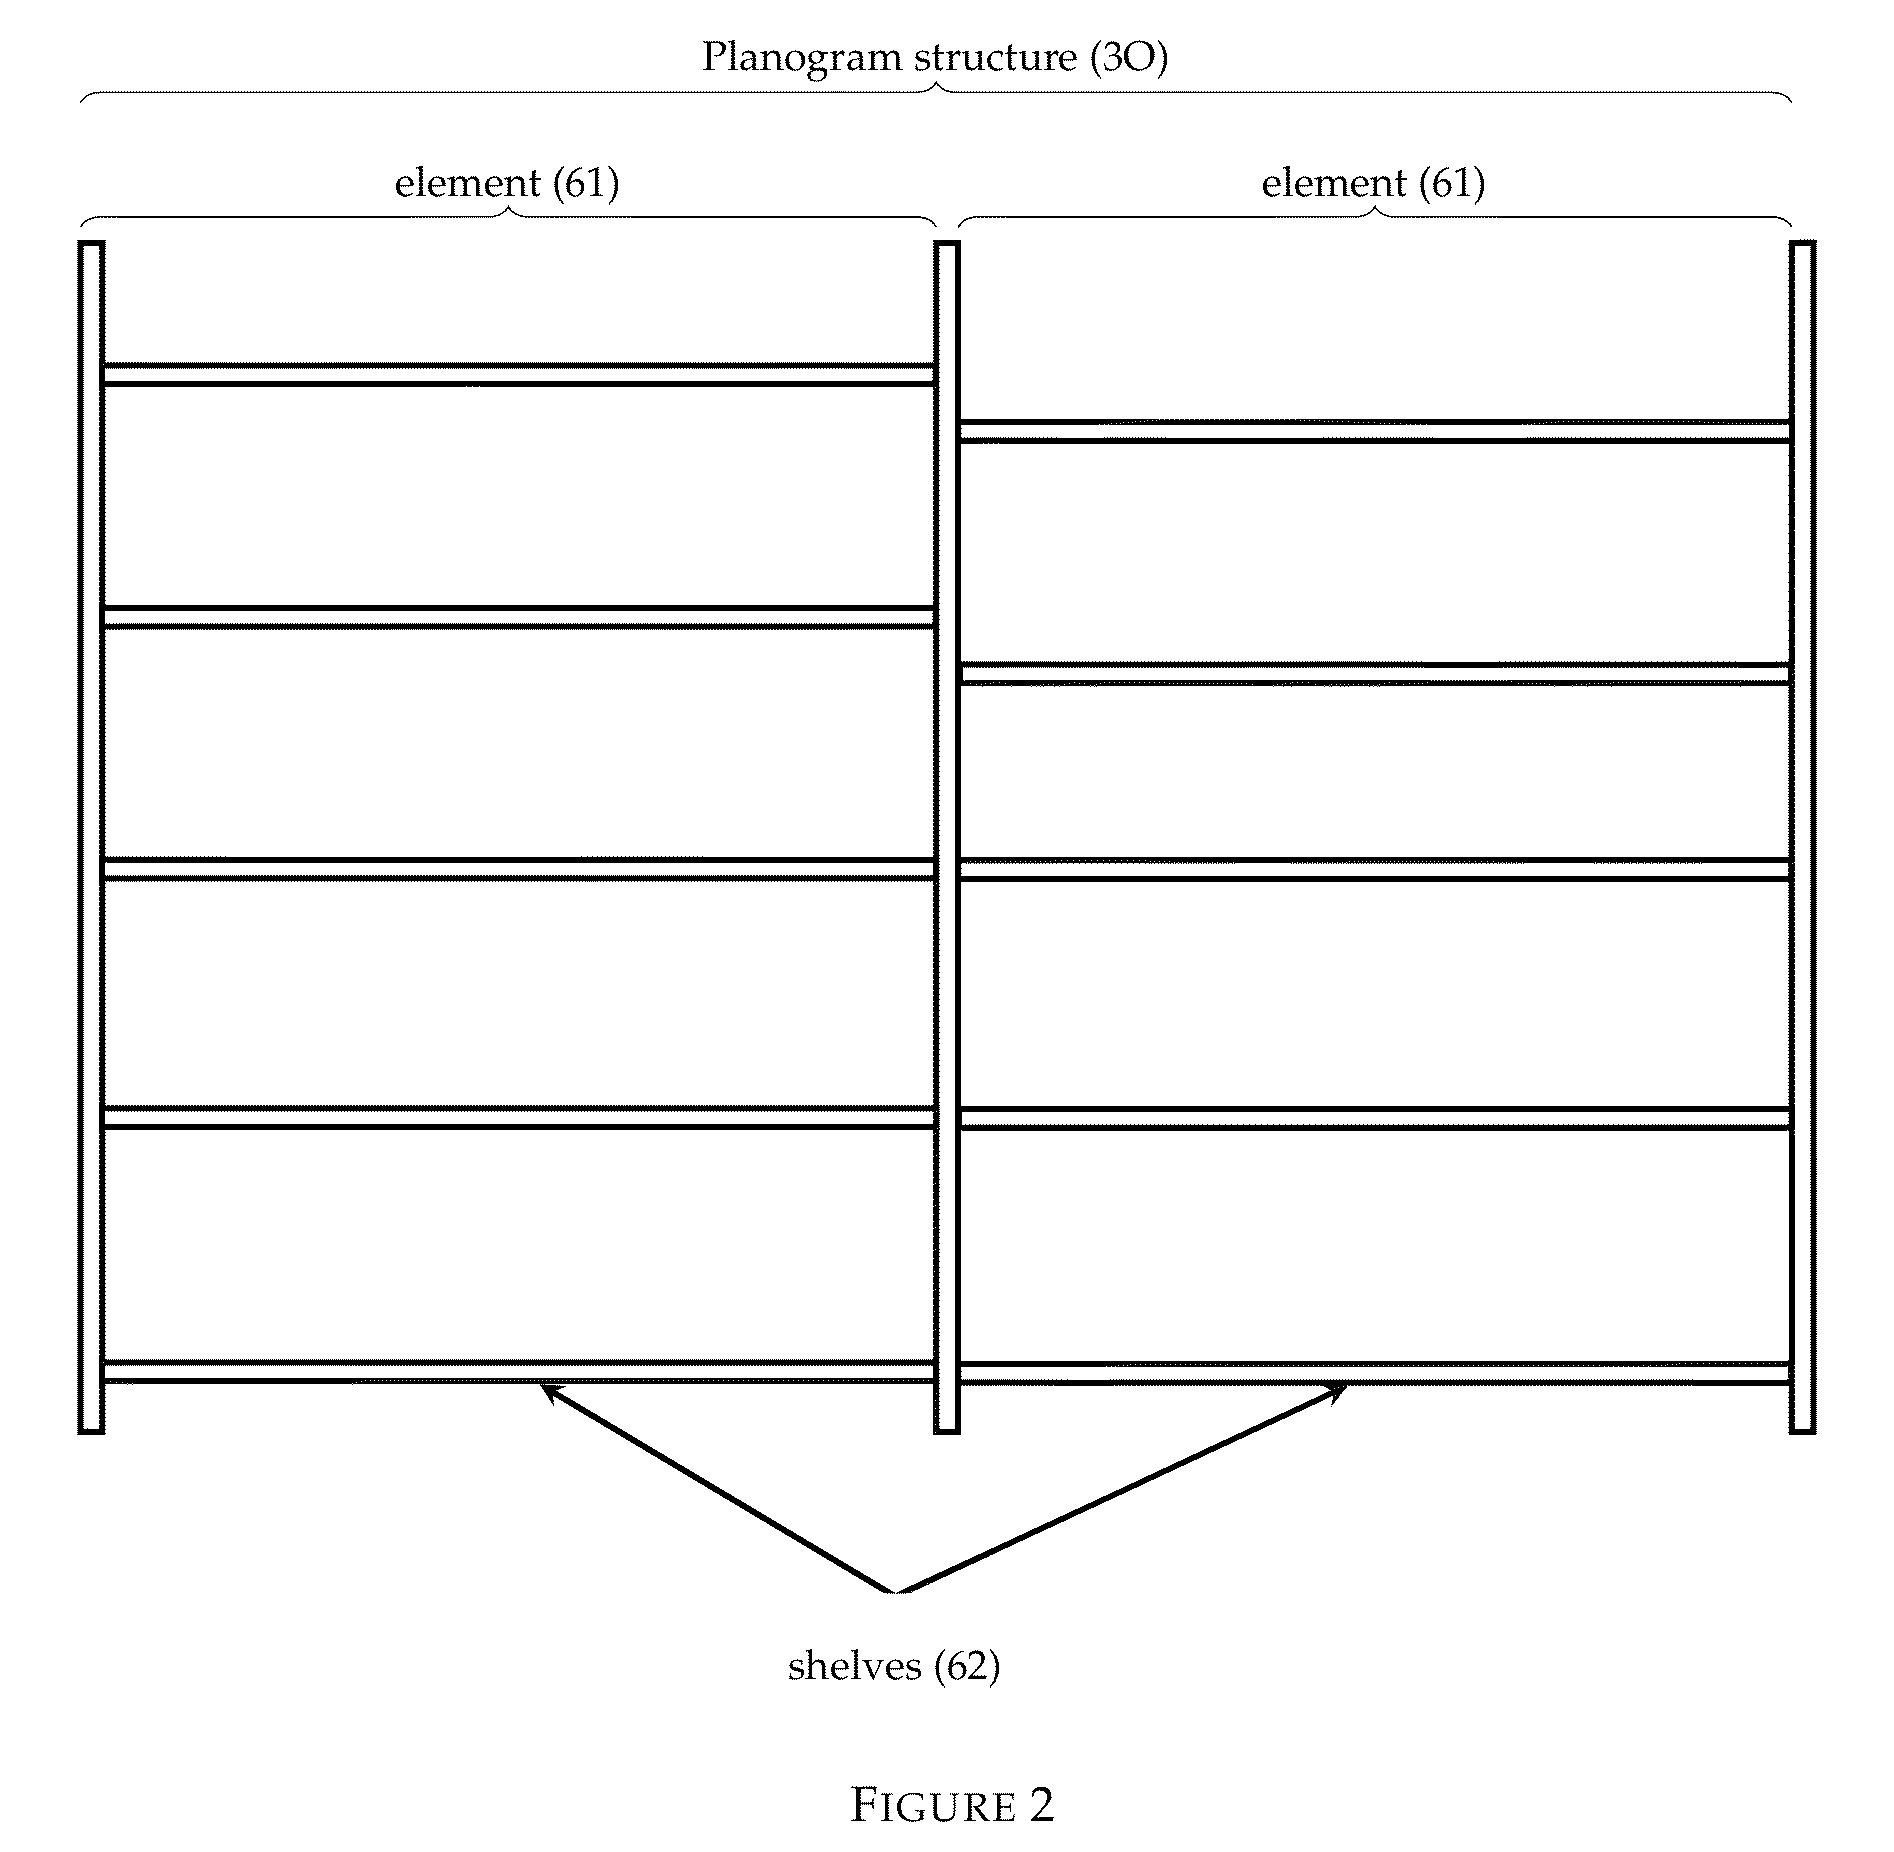 Method for the automated extraction of a planogram from images of shelving